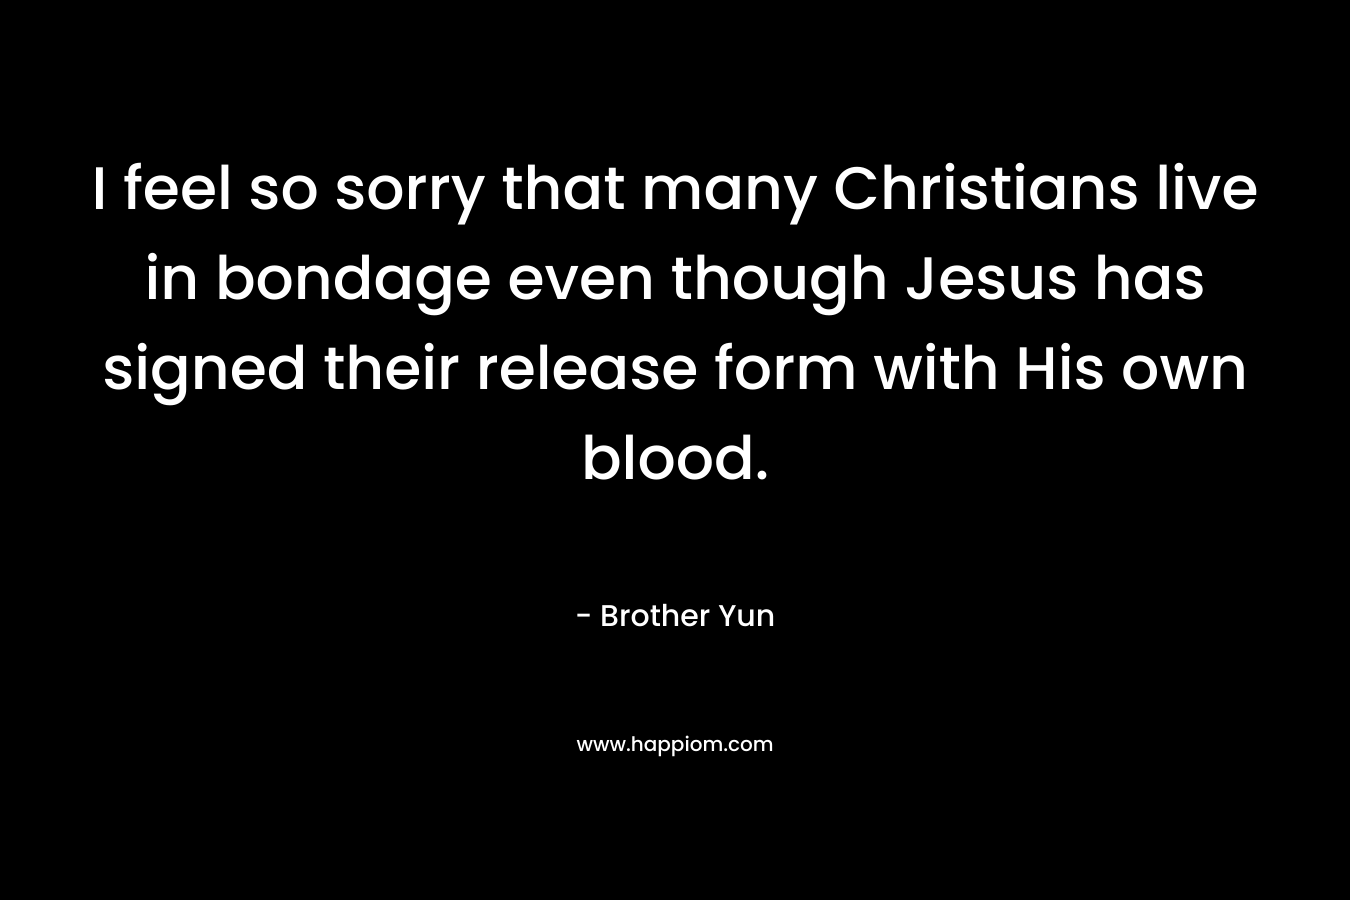 I feel so sorry that many Christians live in bondage even though Jesus has signed their release form with His own blood.